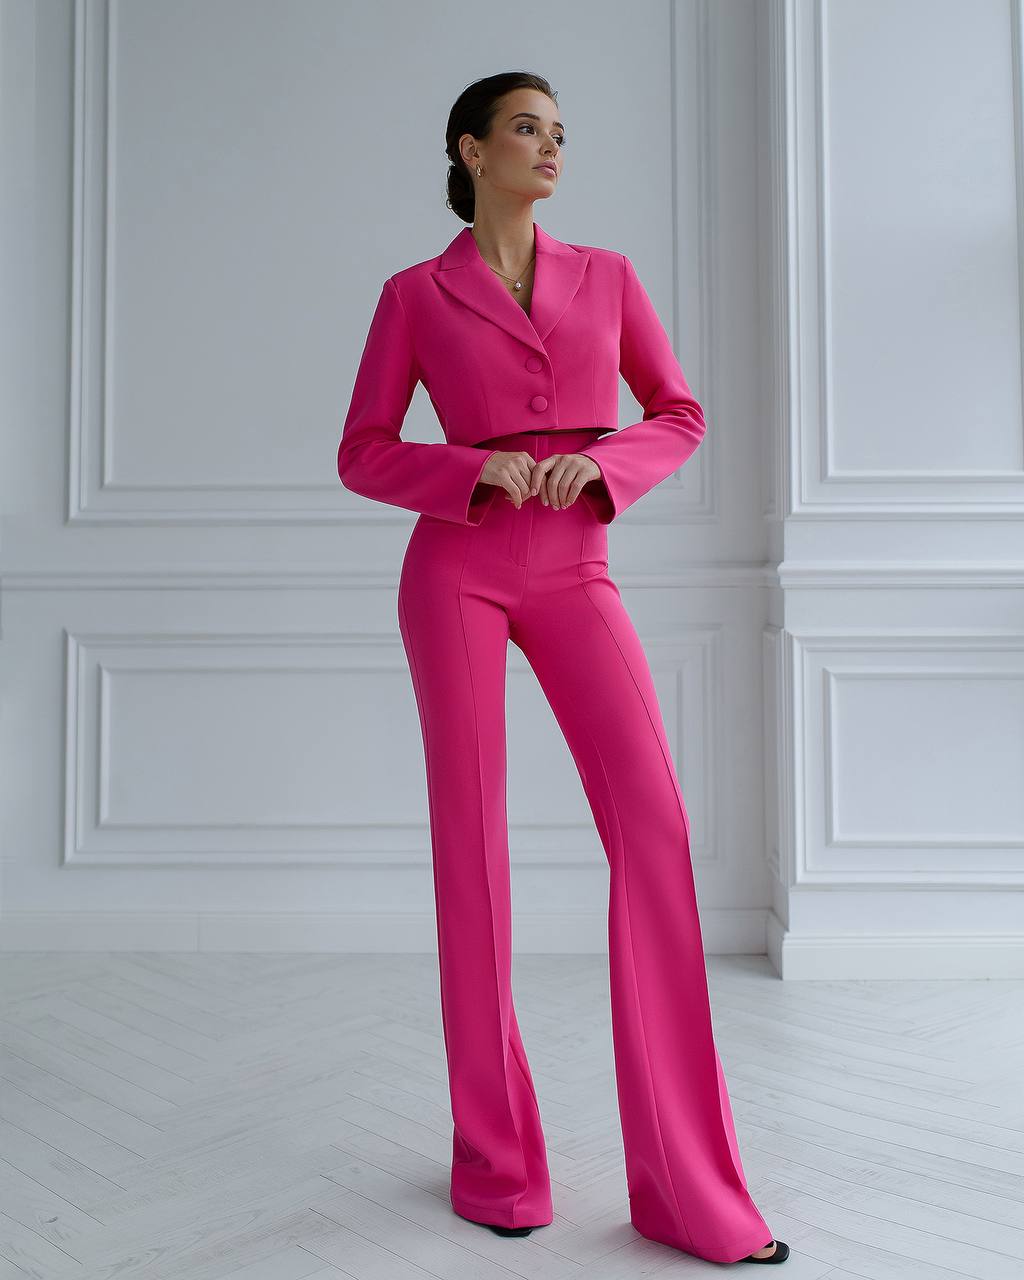 a woman in a pink suit standing in front of a white wall